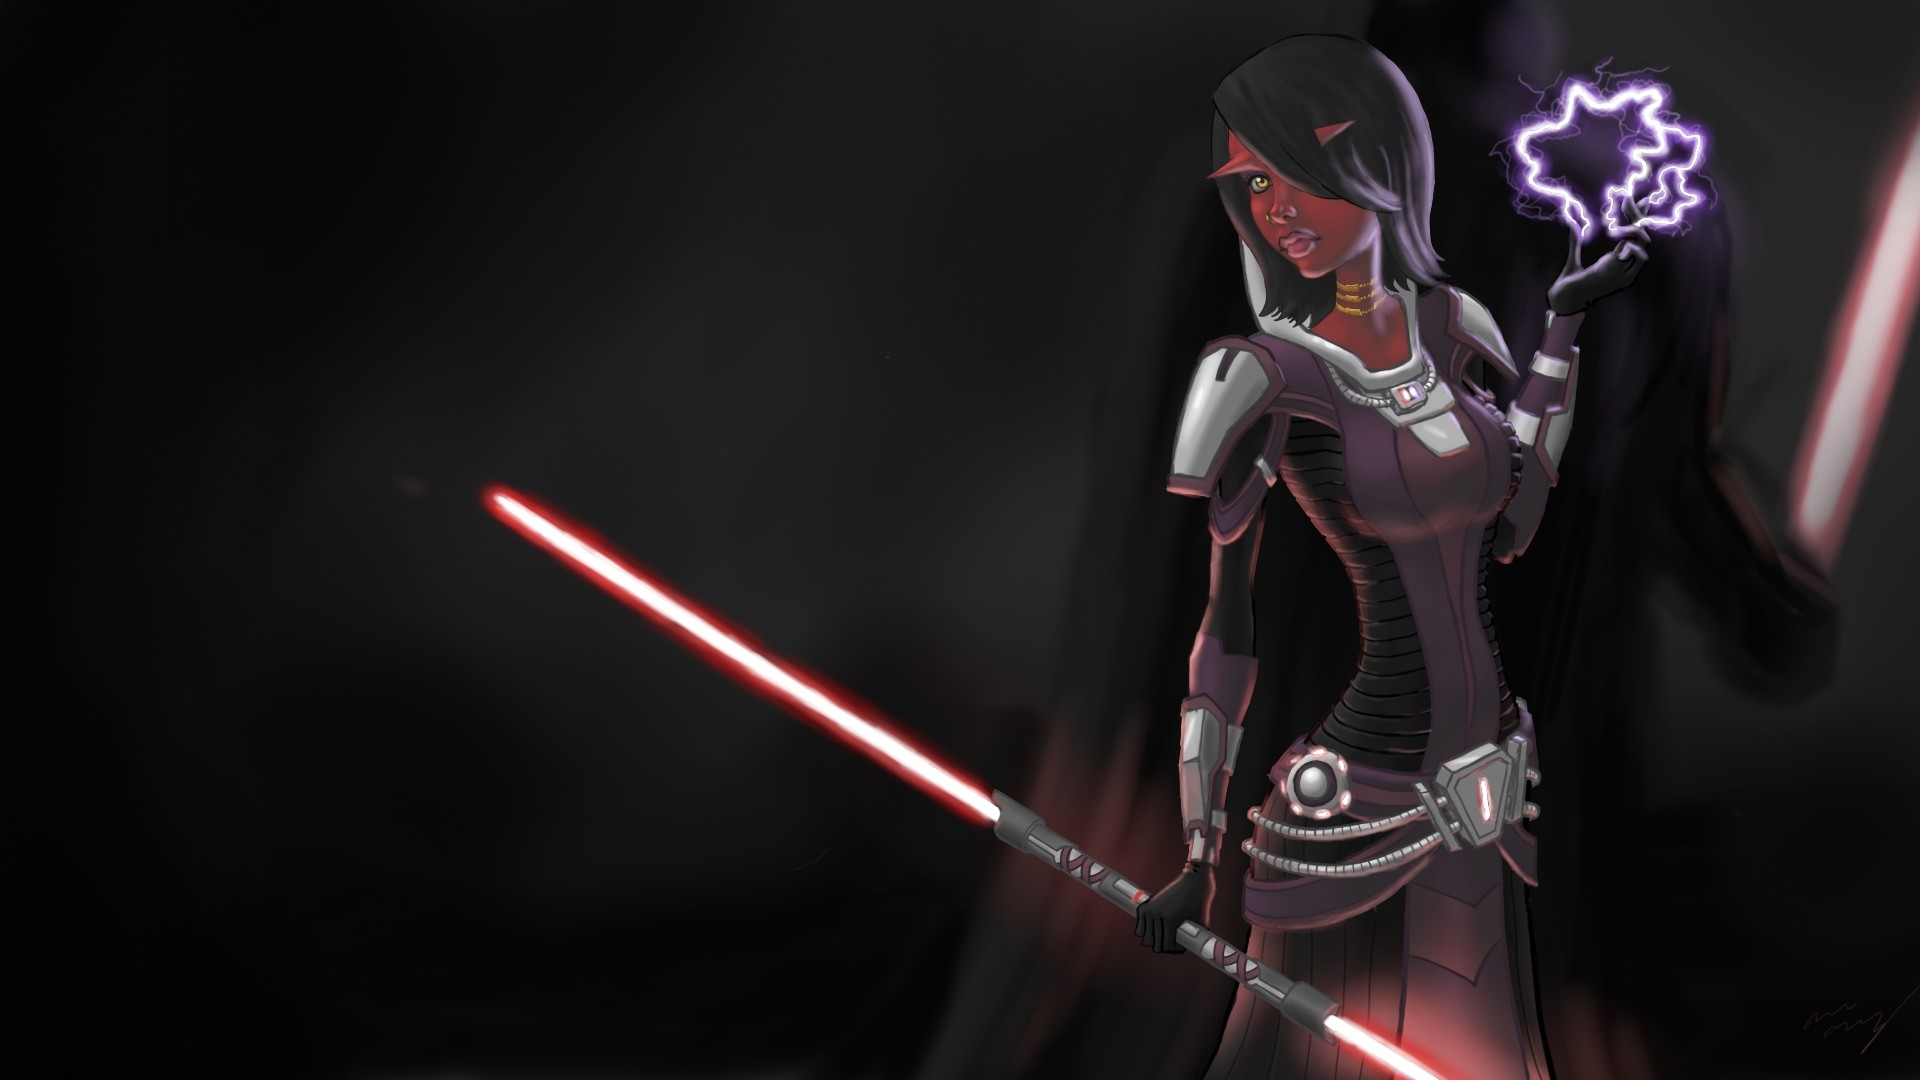 1920x1080 Sith Inquisitor Backgrounds, HQ, Letha Chatelet